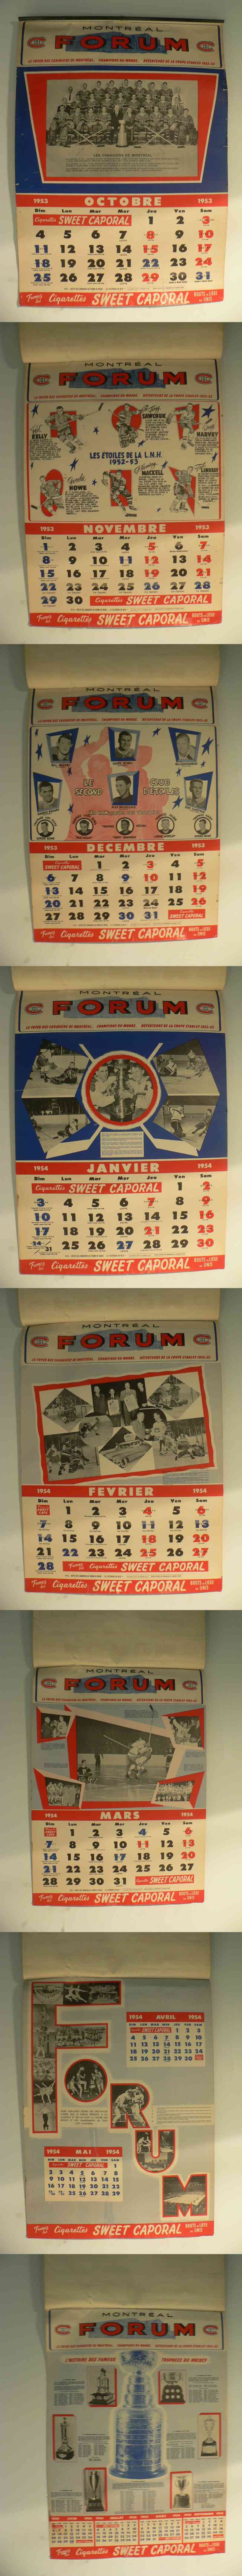 1953-54 SWEET CAPORAL MONTREAL CANADIENS FULL CALENDAR photo